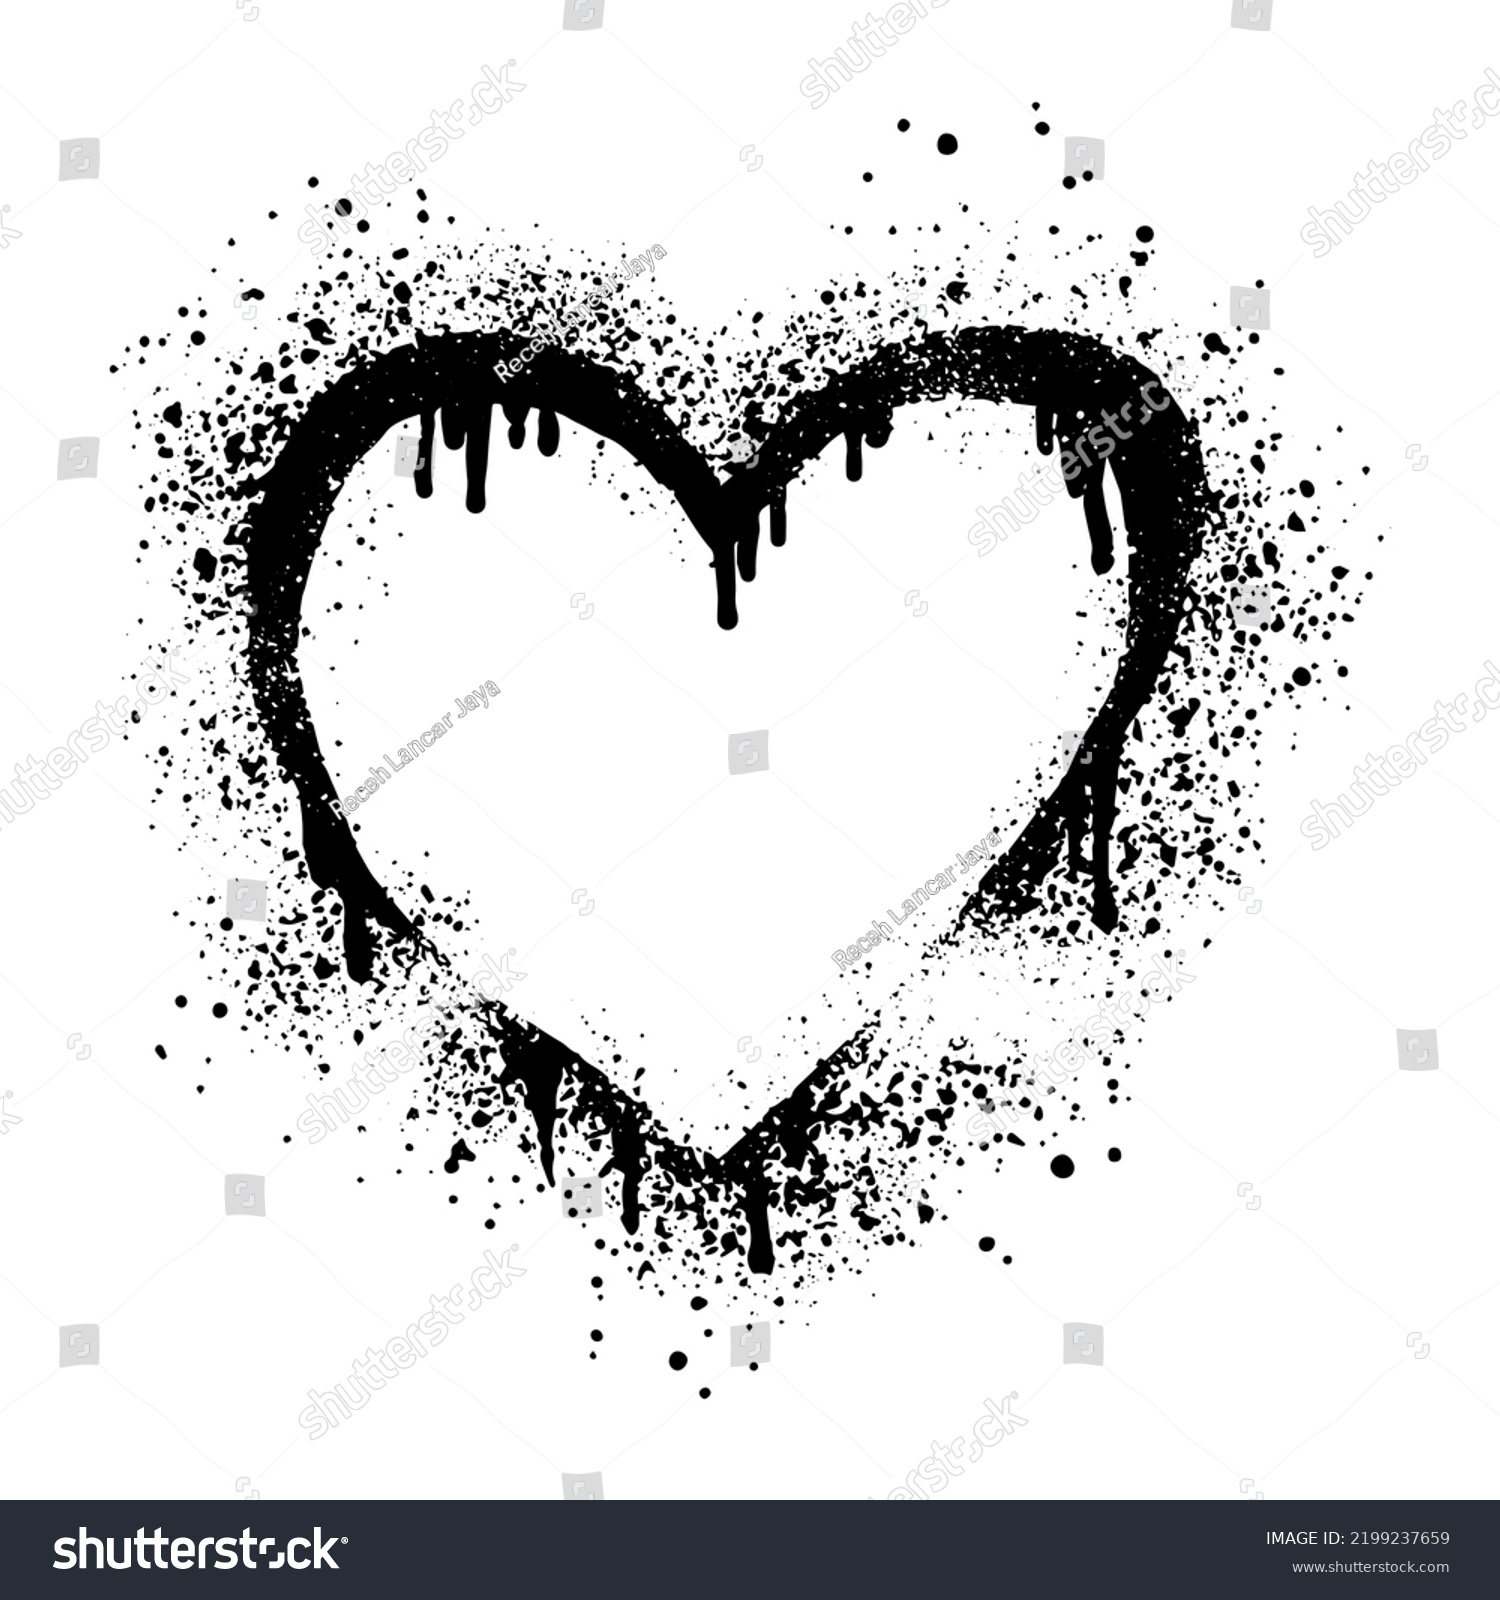 SVG of Spray painted graffiti heart sign in black over white. Love heart drip symbol. isolated on white background. vector illustration svg